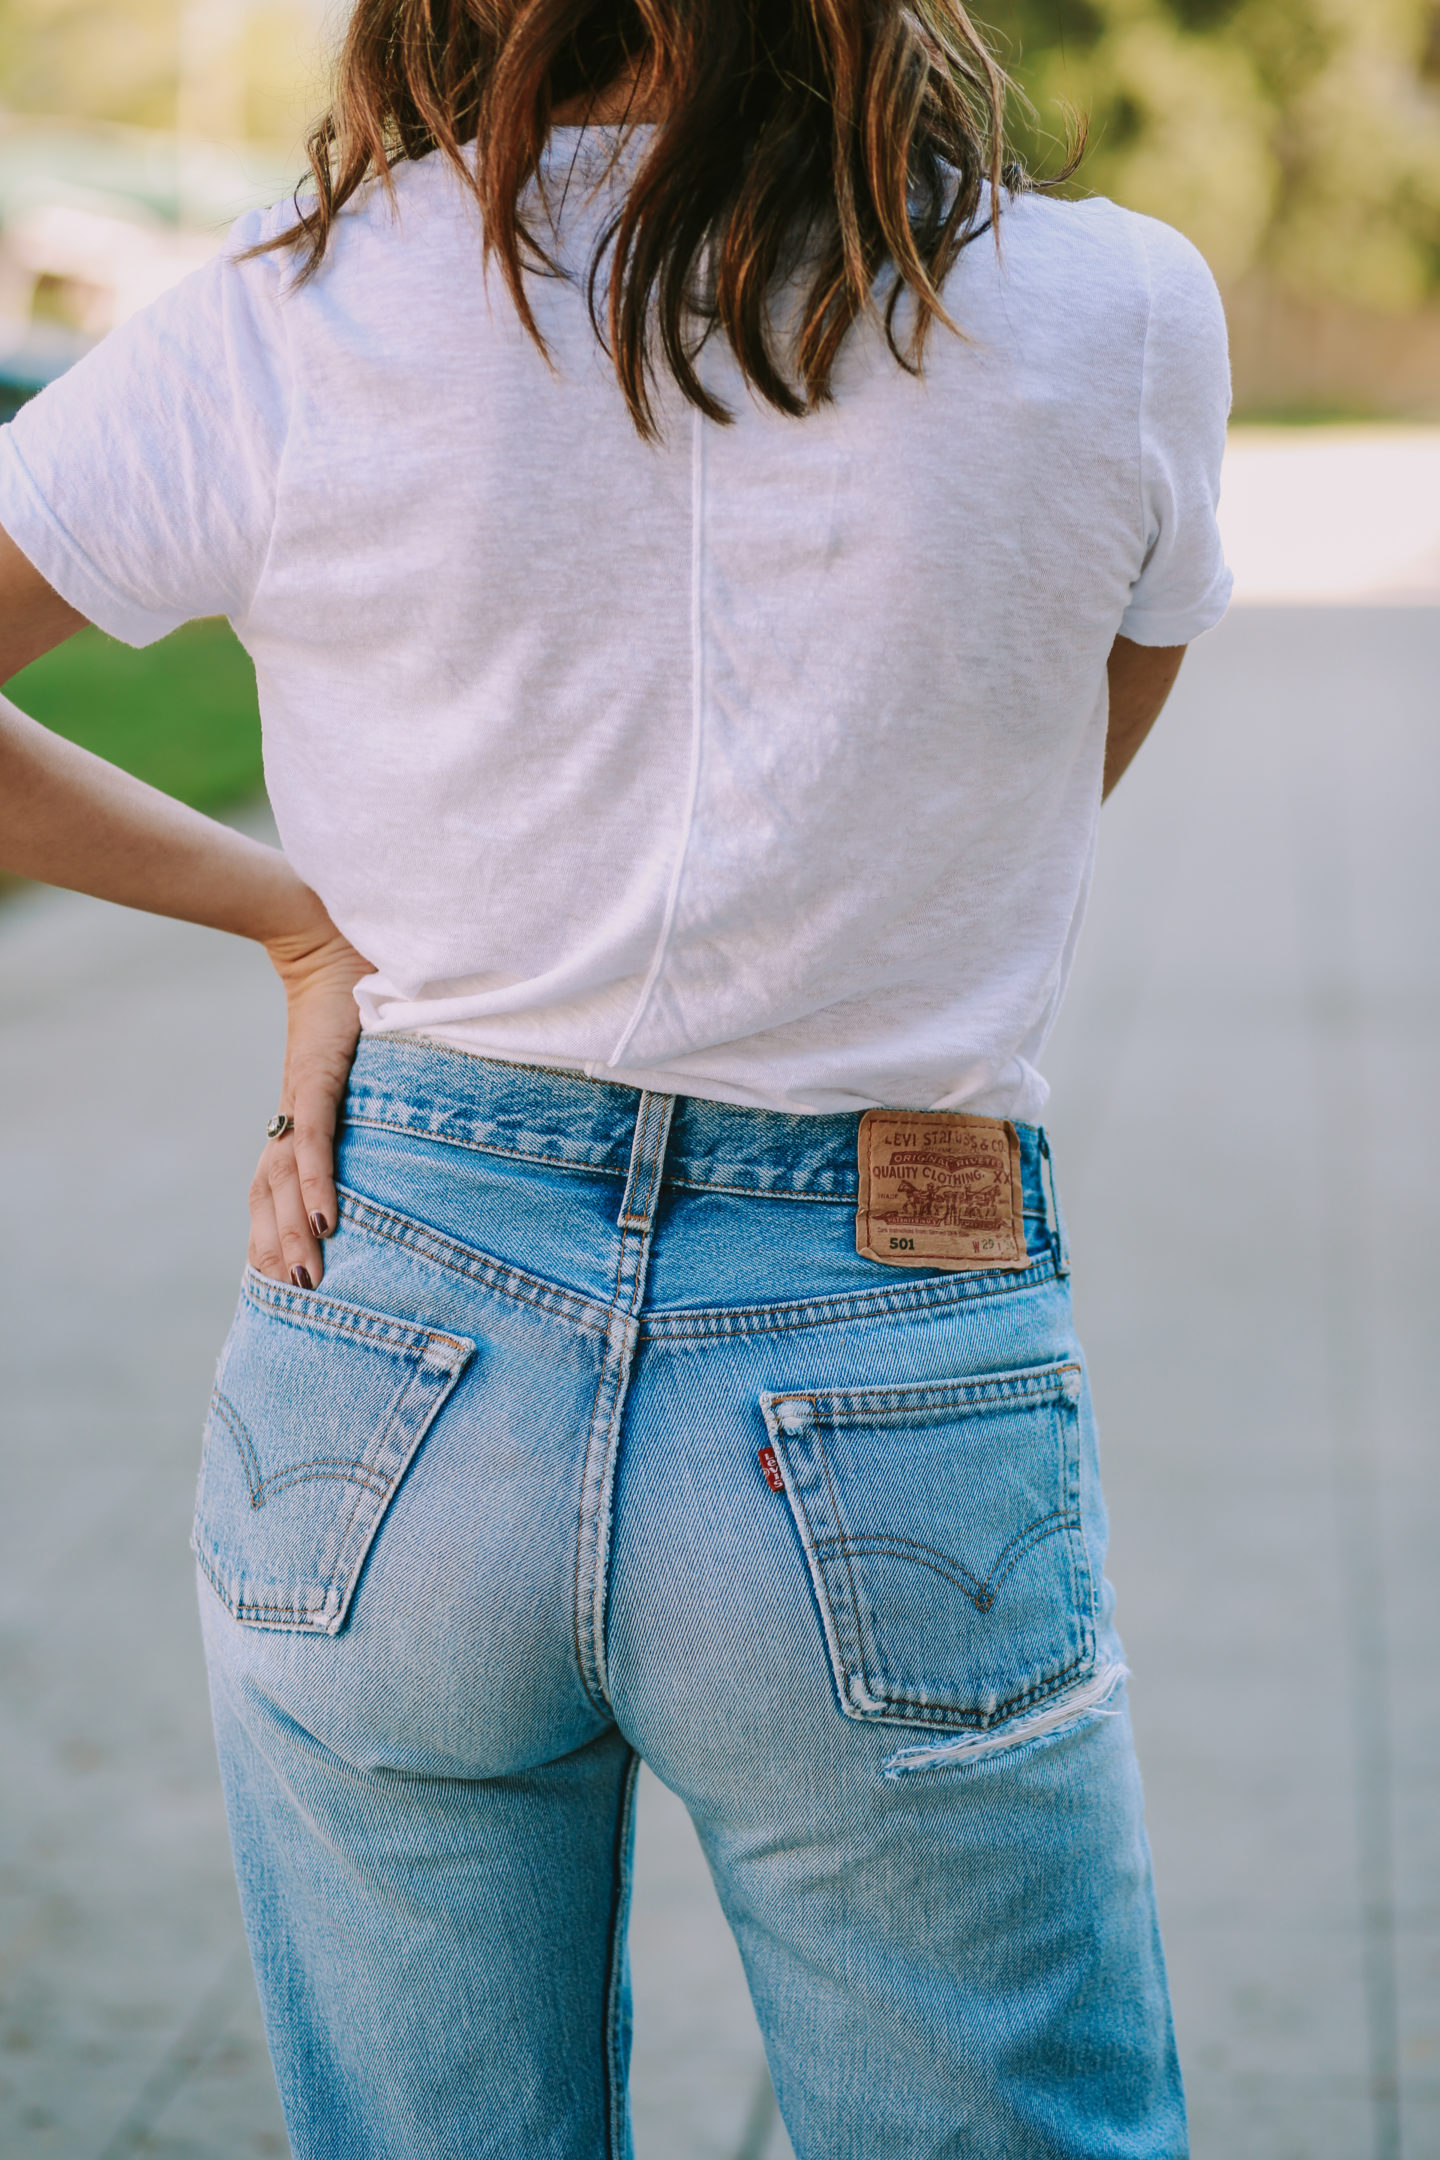 Vintage Levi's Fit Guide: Which Style is Right for You? – We Thieves